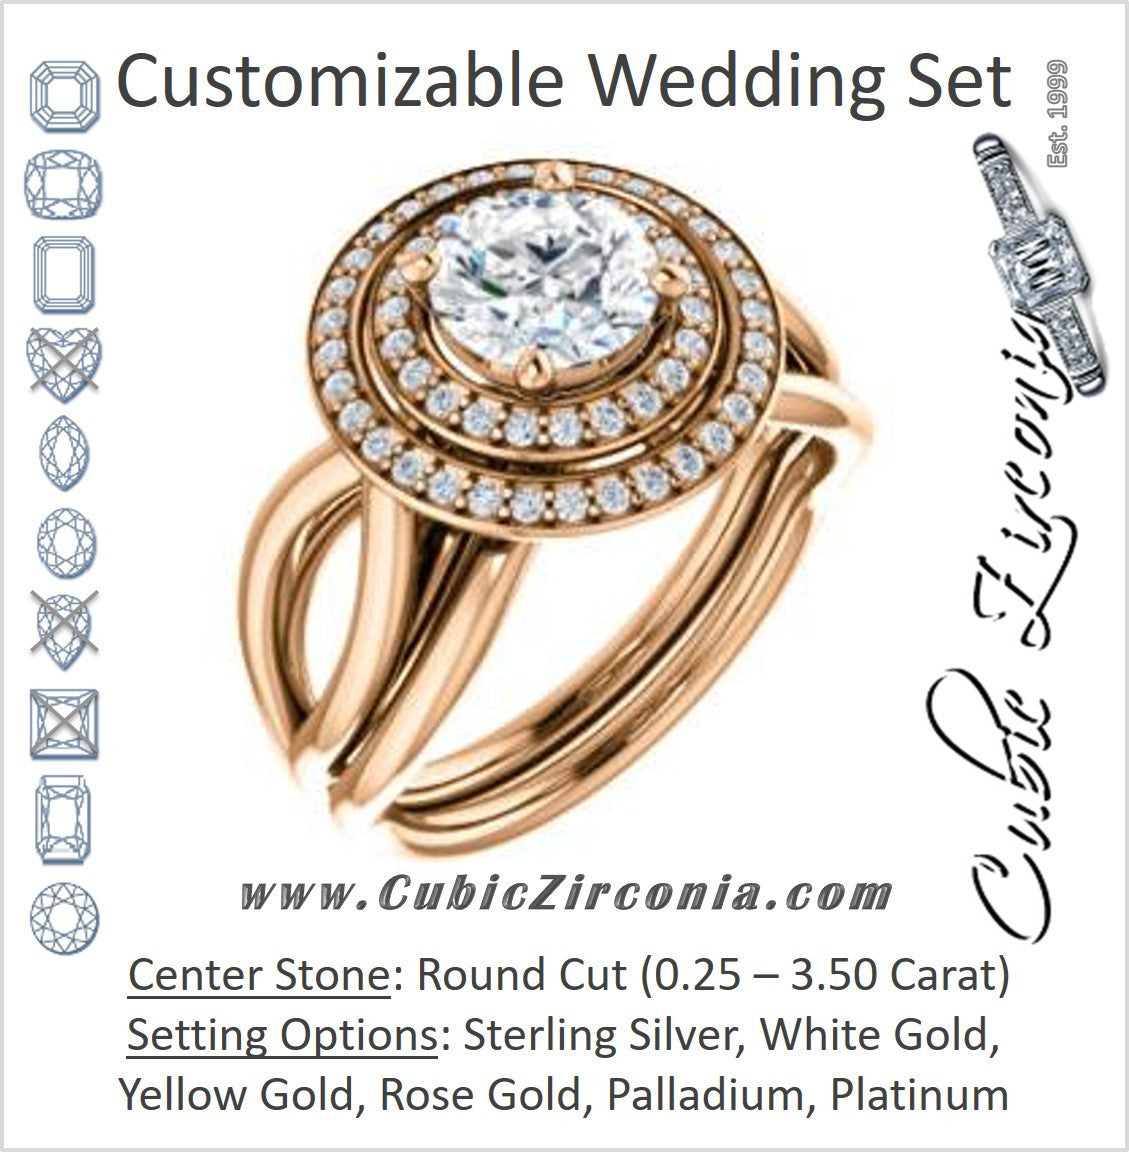 CZ Wedding Set, featuring The Magda Lesli engagement ring (Customizable Double-Halo Style Round Cut with Curving Split Band)